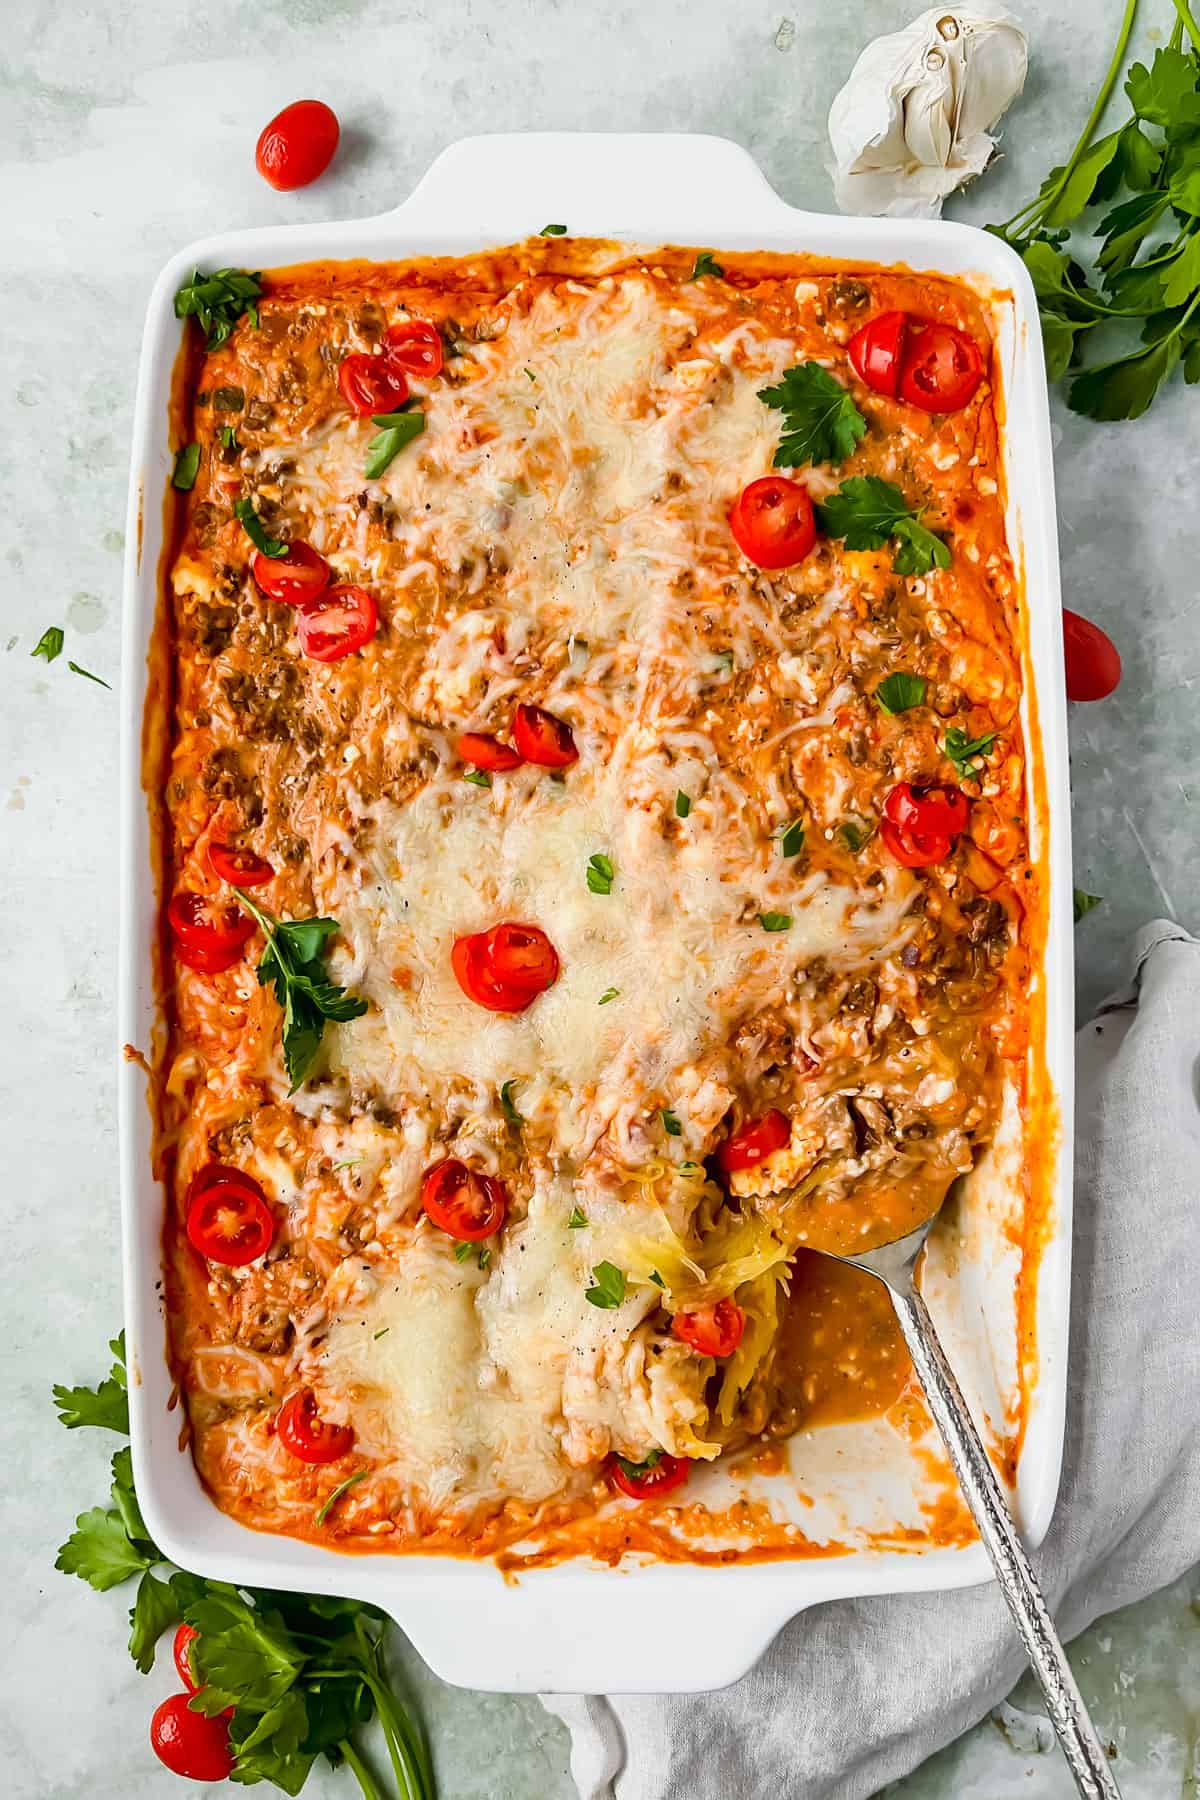 Baked Spaghetti Squash Casserole (Low Carb, High Protein)